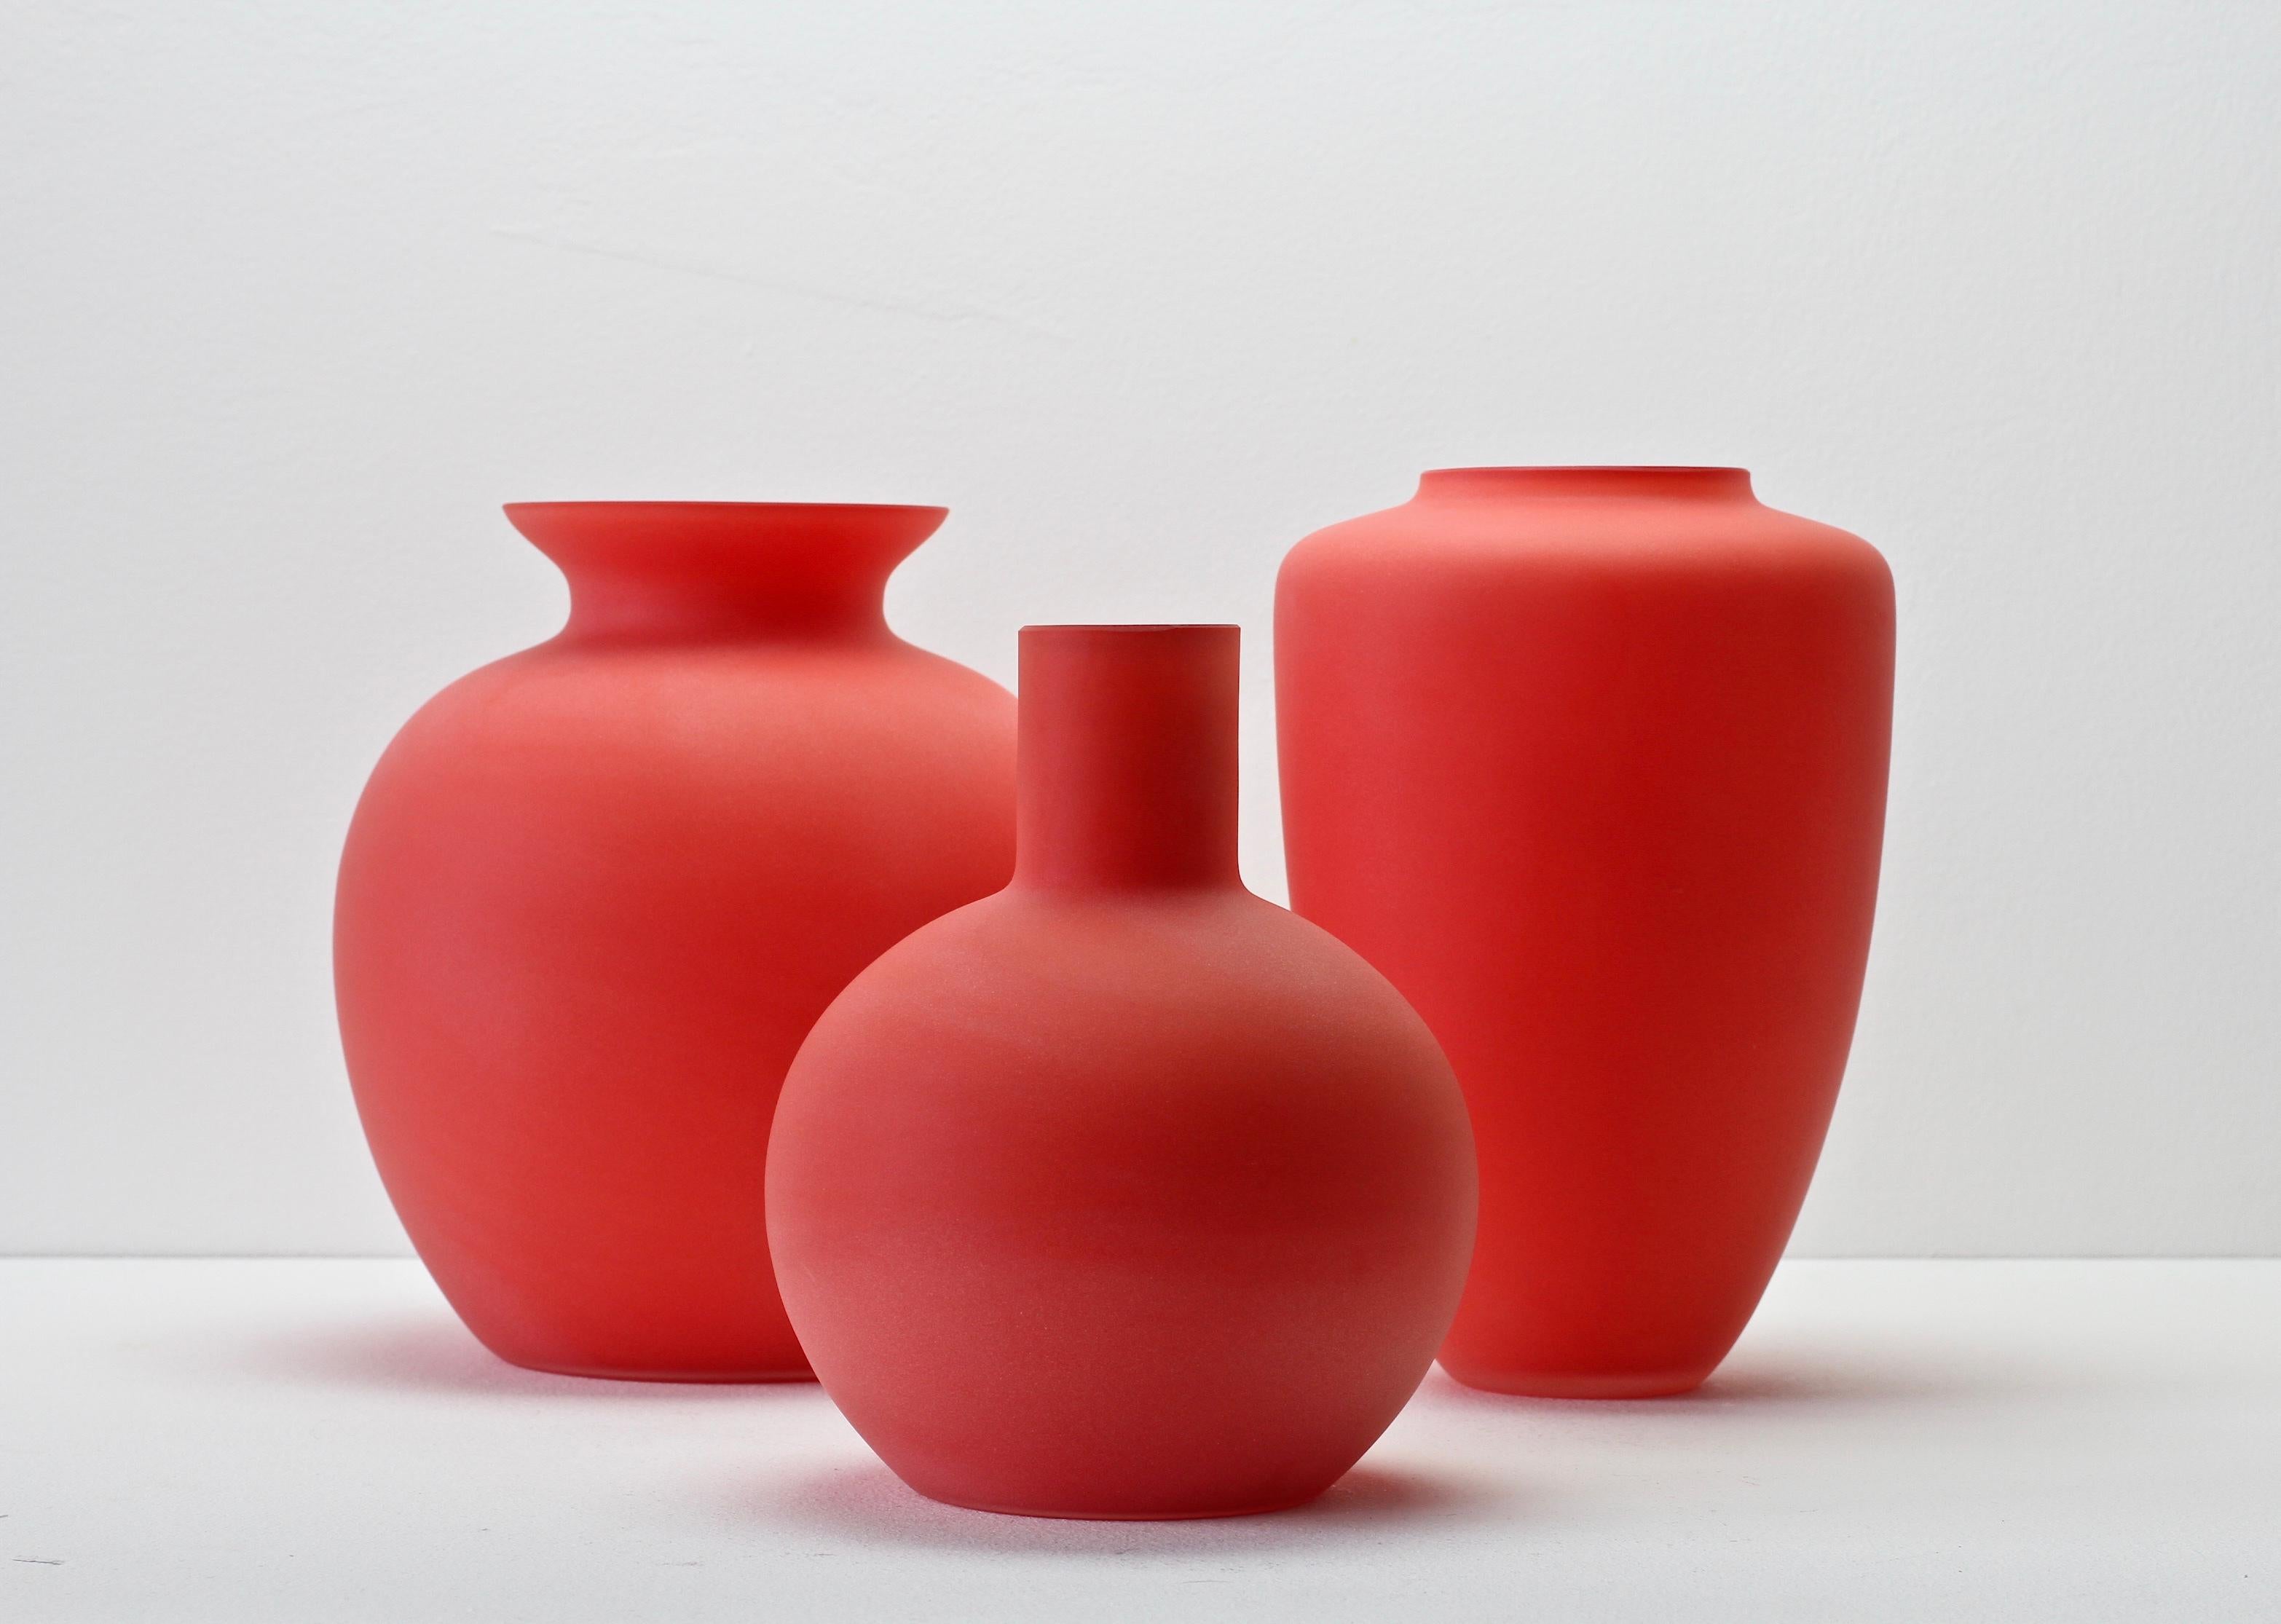 Cenedese set, group, ensemble or collection of mid-century modern Murano glass vases, bowls or vessels, made in Italy. Particularly striking are the forms, they have all the characteristics of hand thrown pottery with the unmistakable look and feel